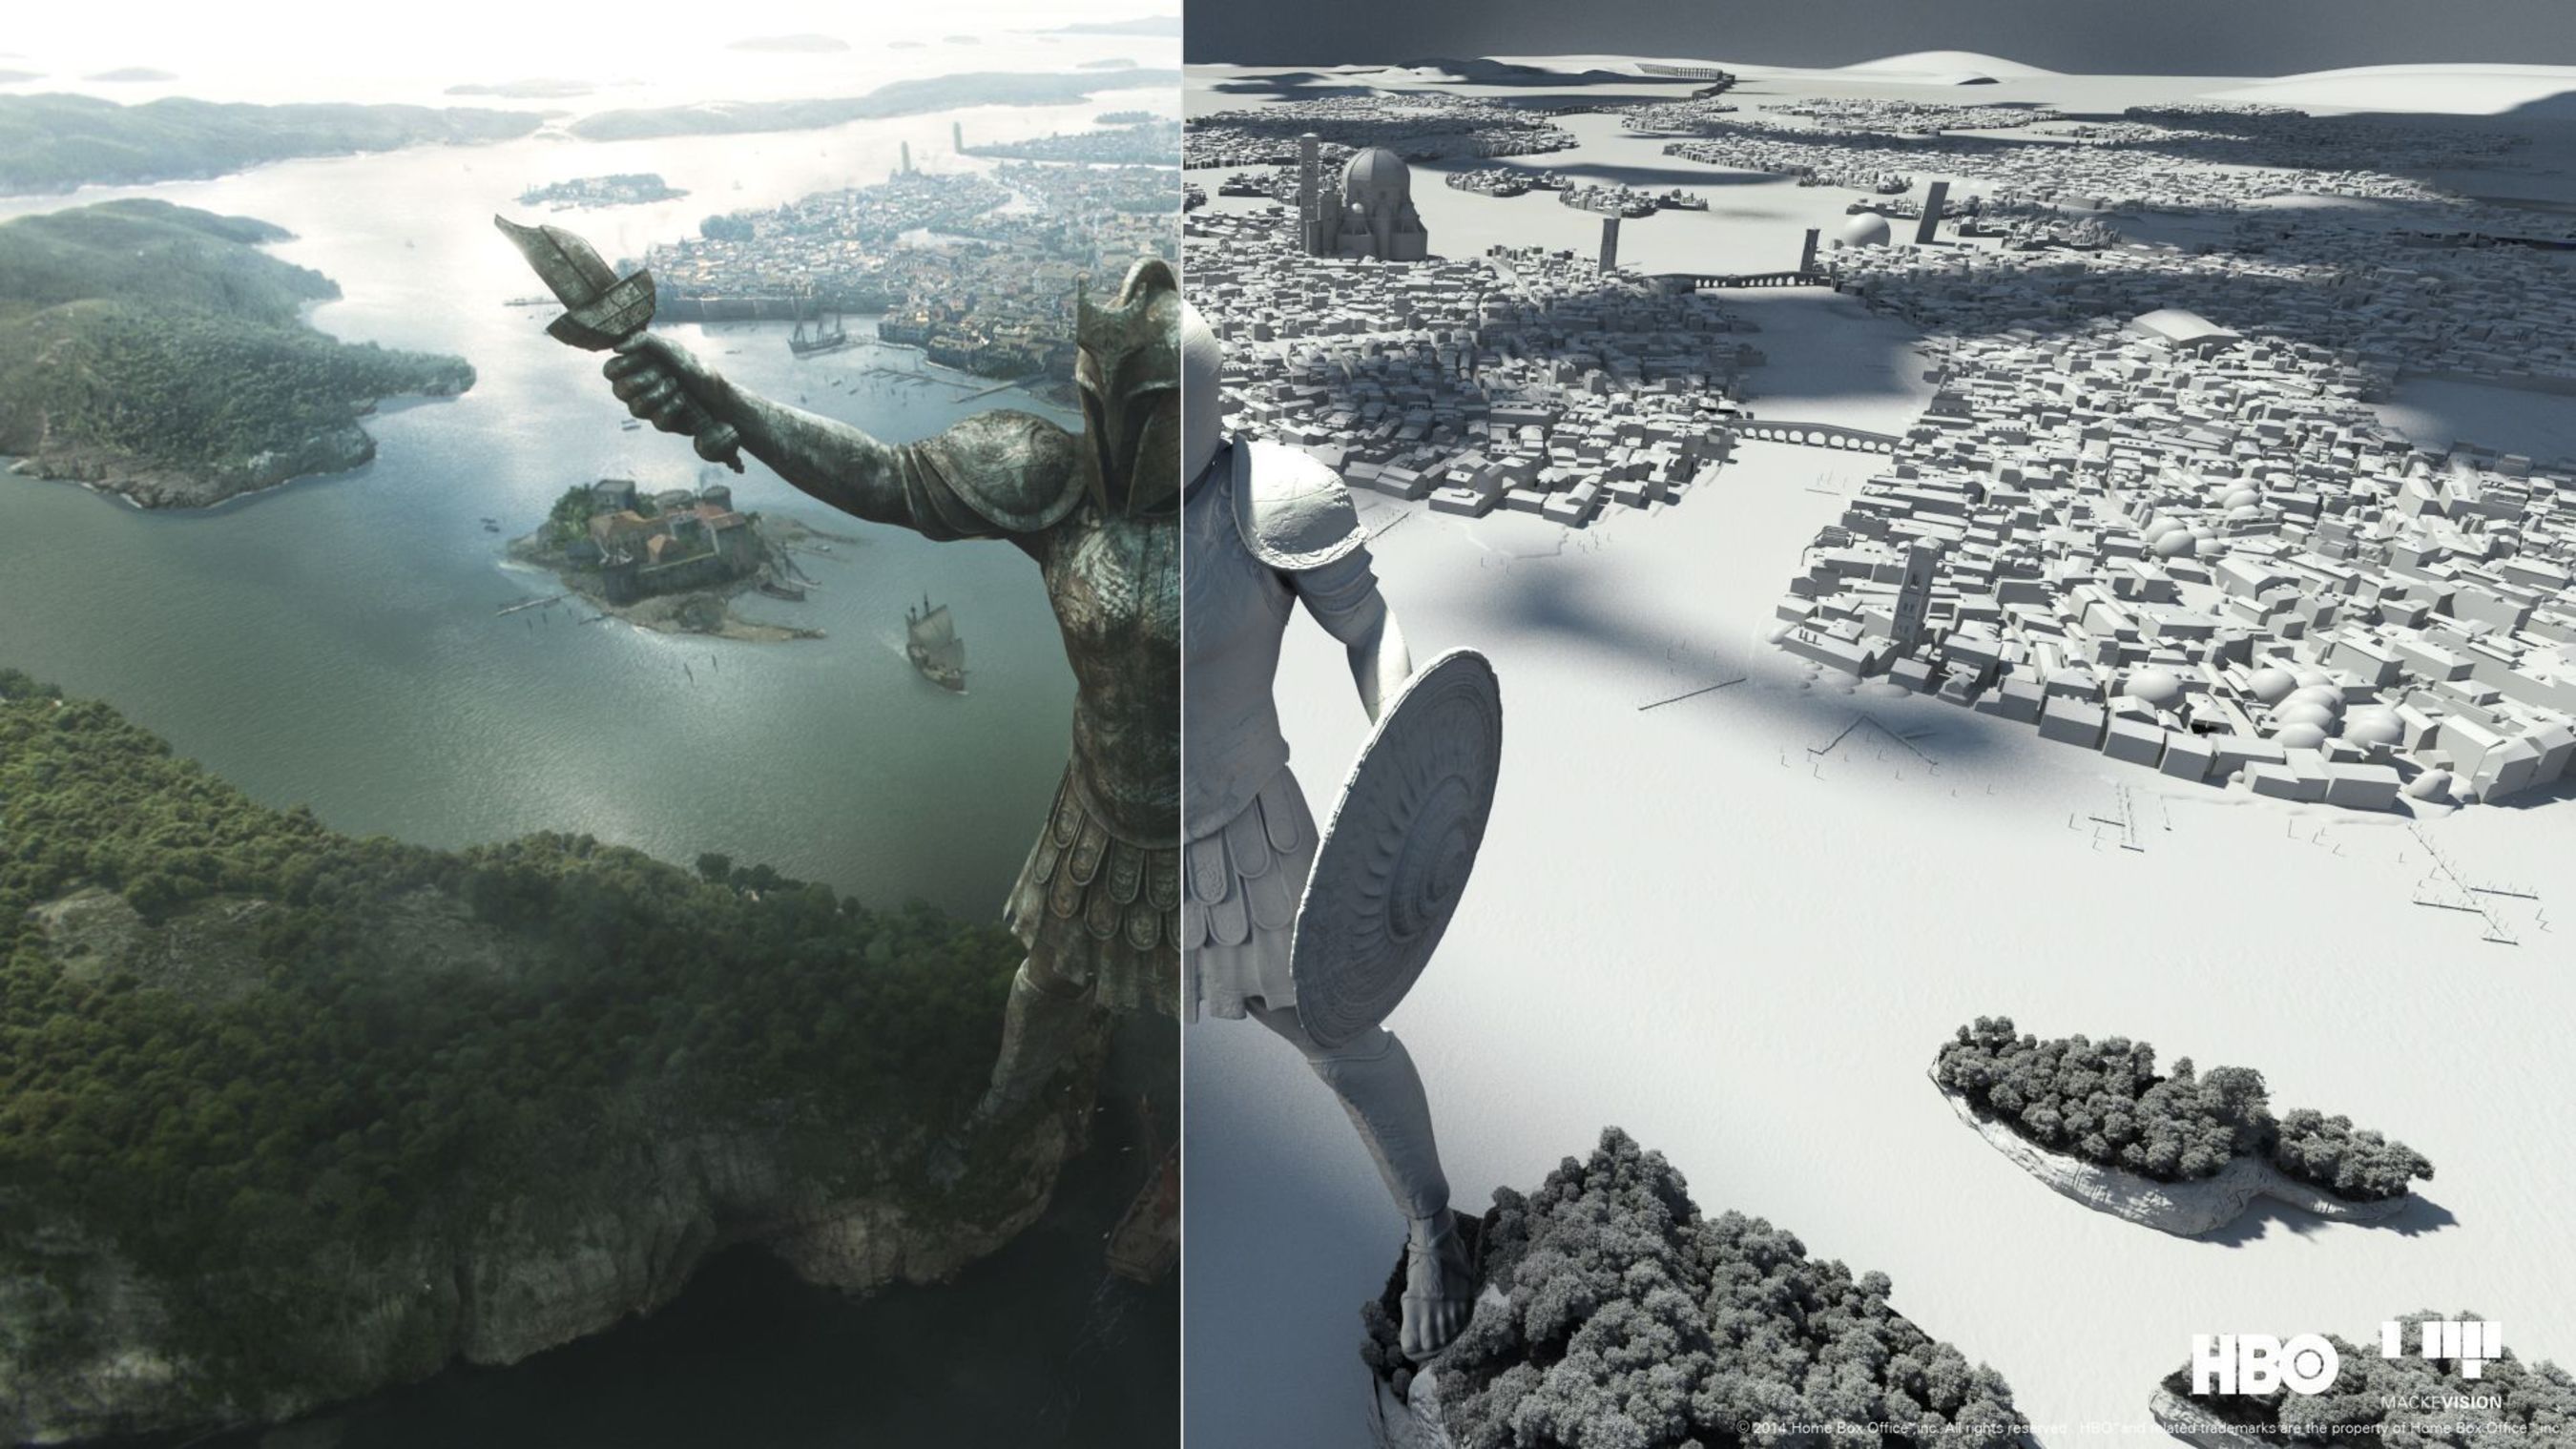 The "Game of Thrones" city of Braavos, which can be seen for the first time this season was created as an elaborate full CG digital environment by Mackevision, Germany (Stuttgart) (PRNewsFoto/Mackevision Medien Design GmbH)